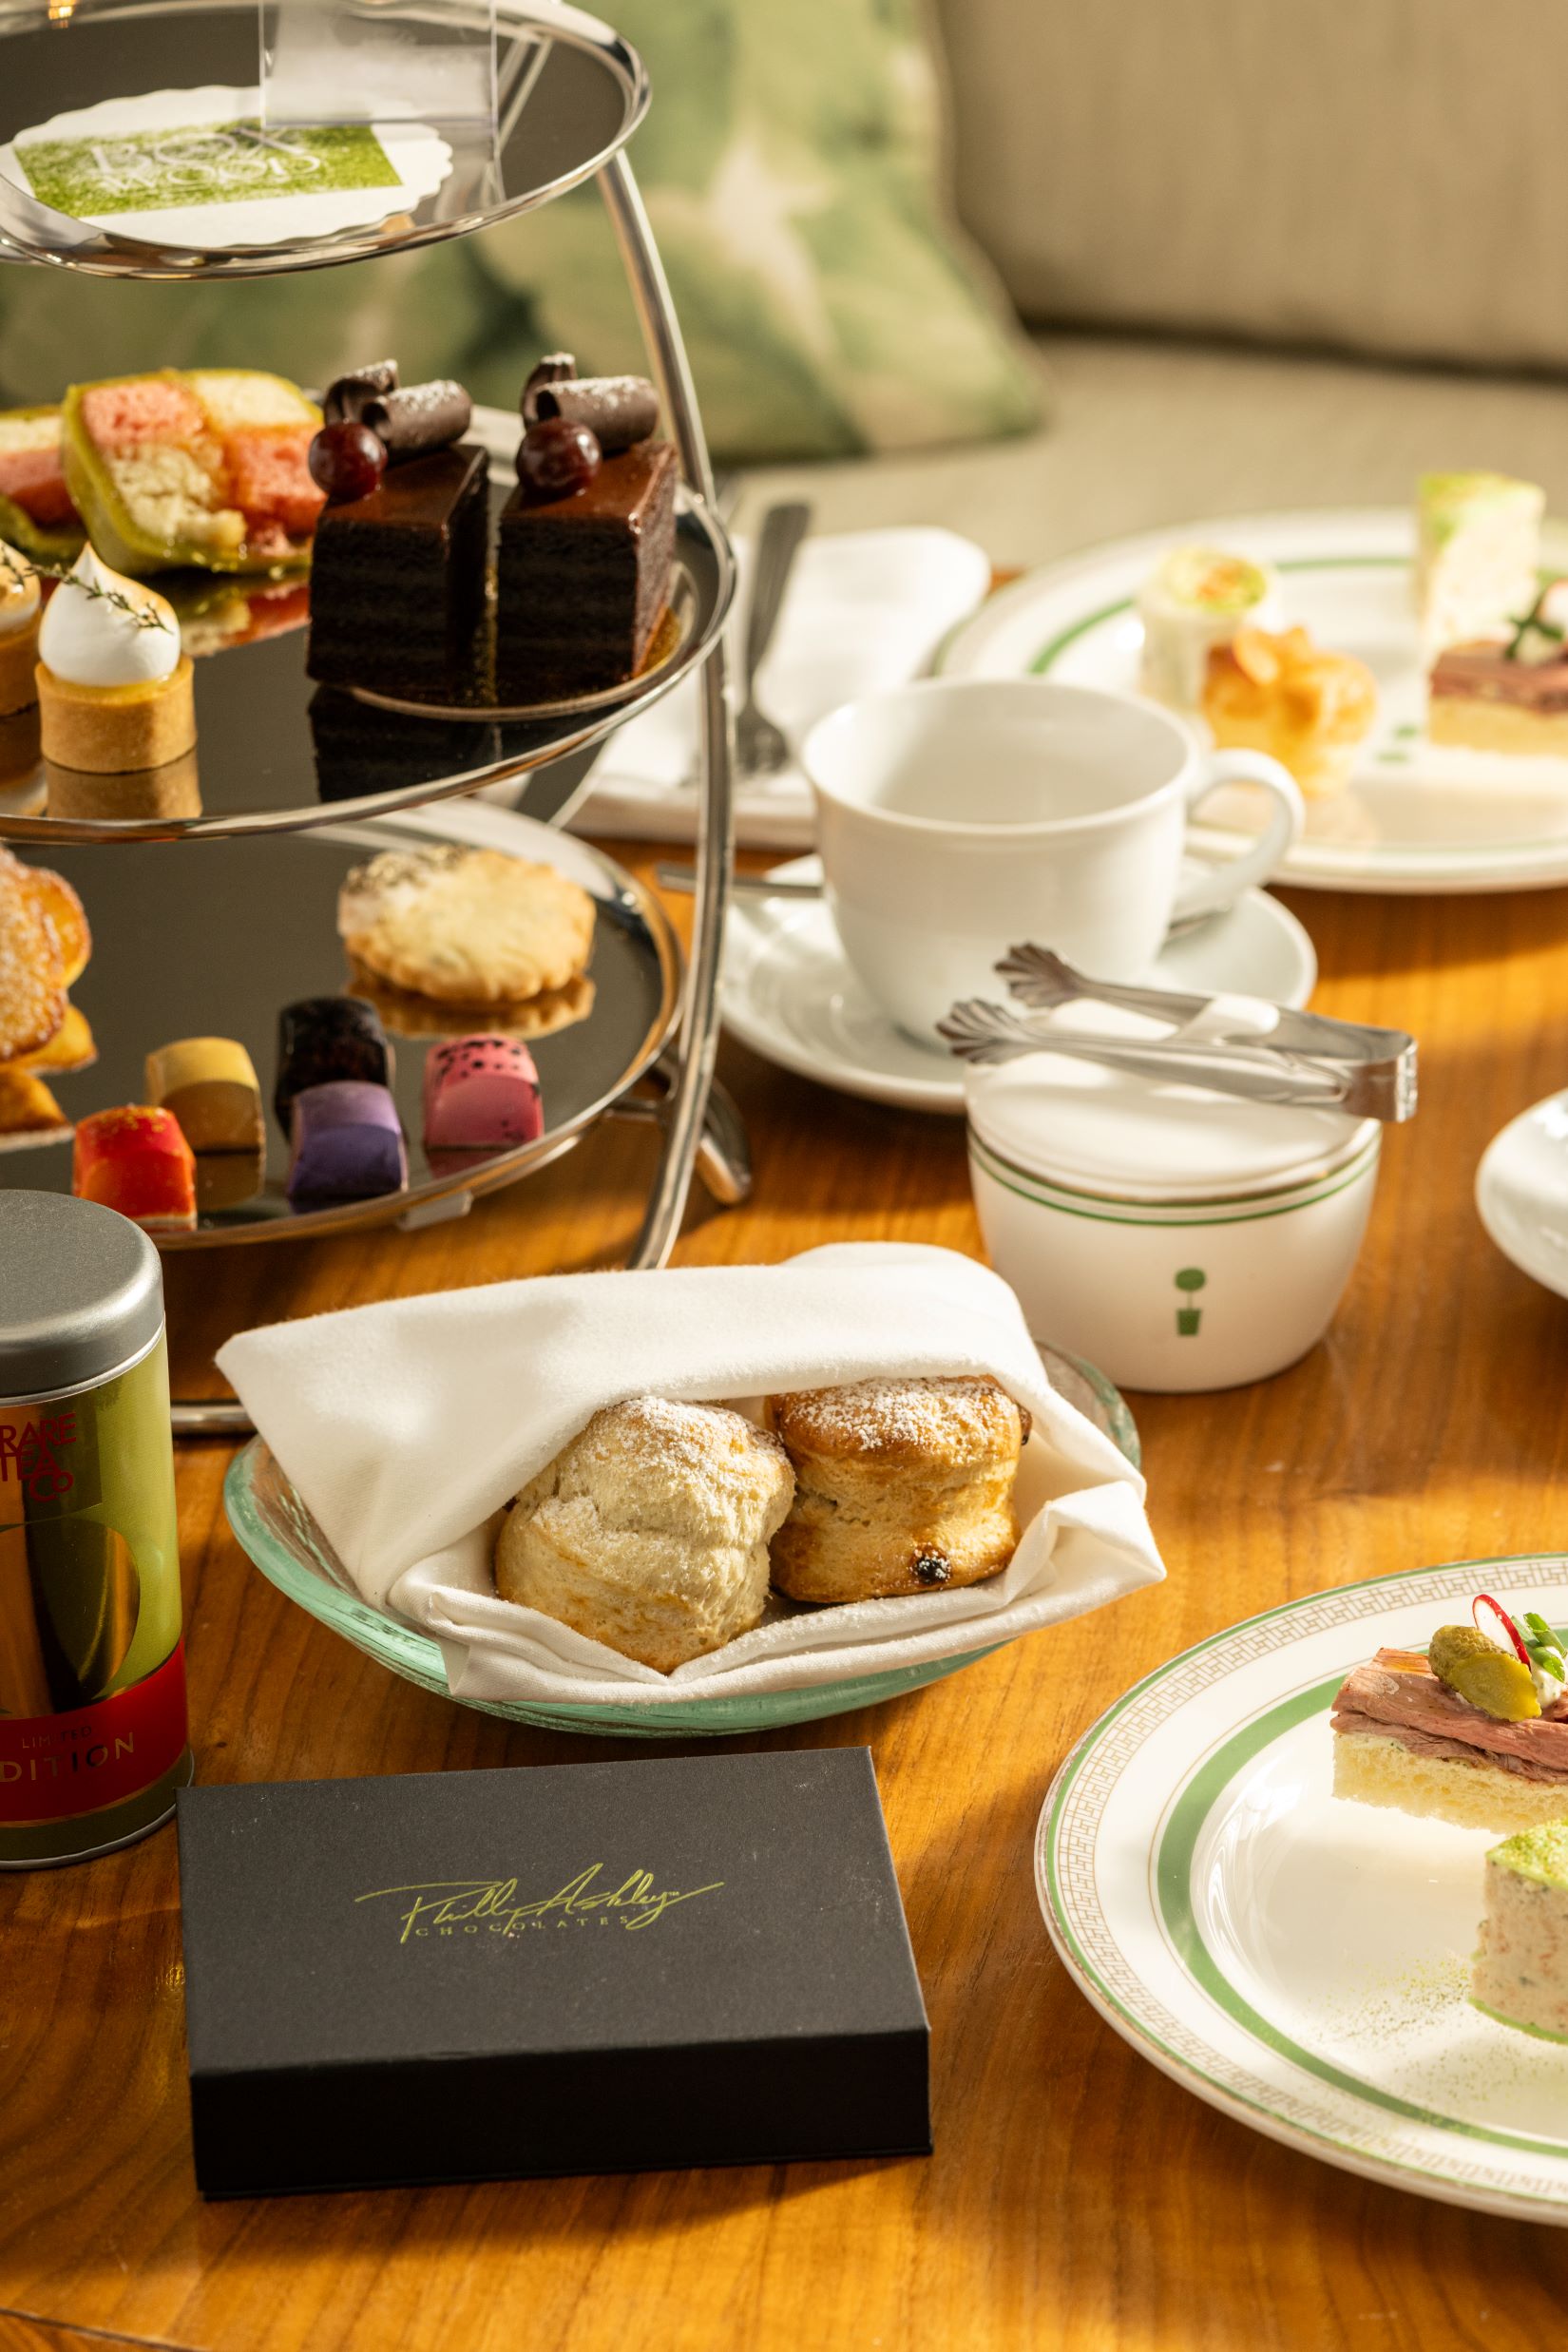 An image of the tea sandwiches, baked goods, tea, and Phillip Ashley Chocolates at the London West Hollywood at Beverly Hills.